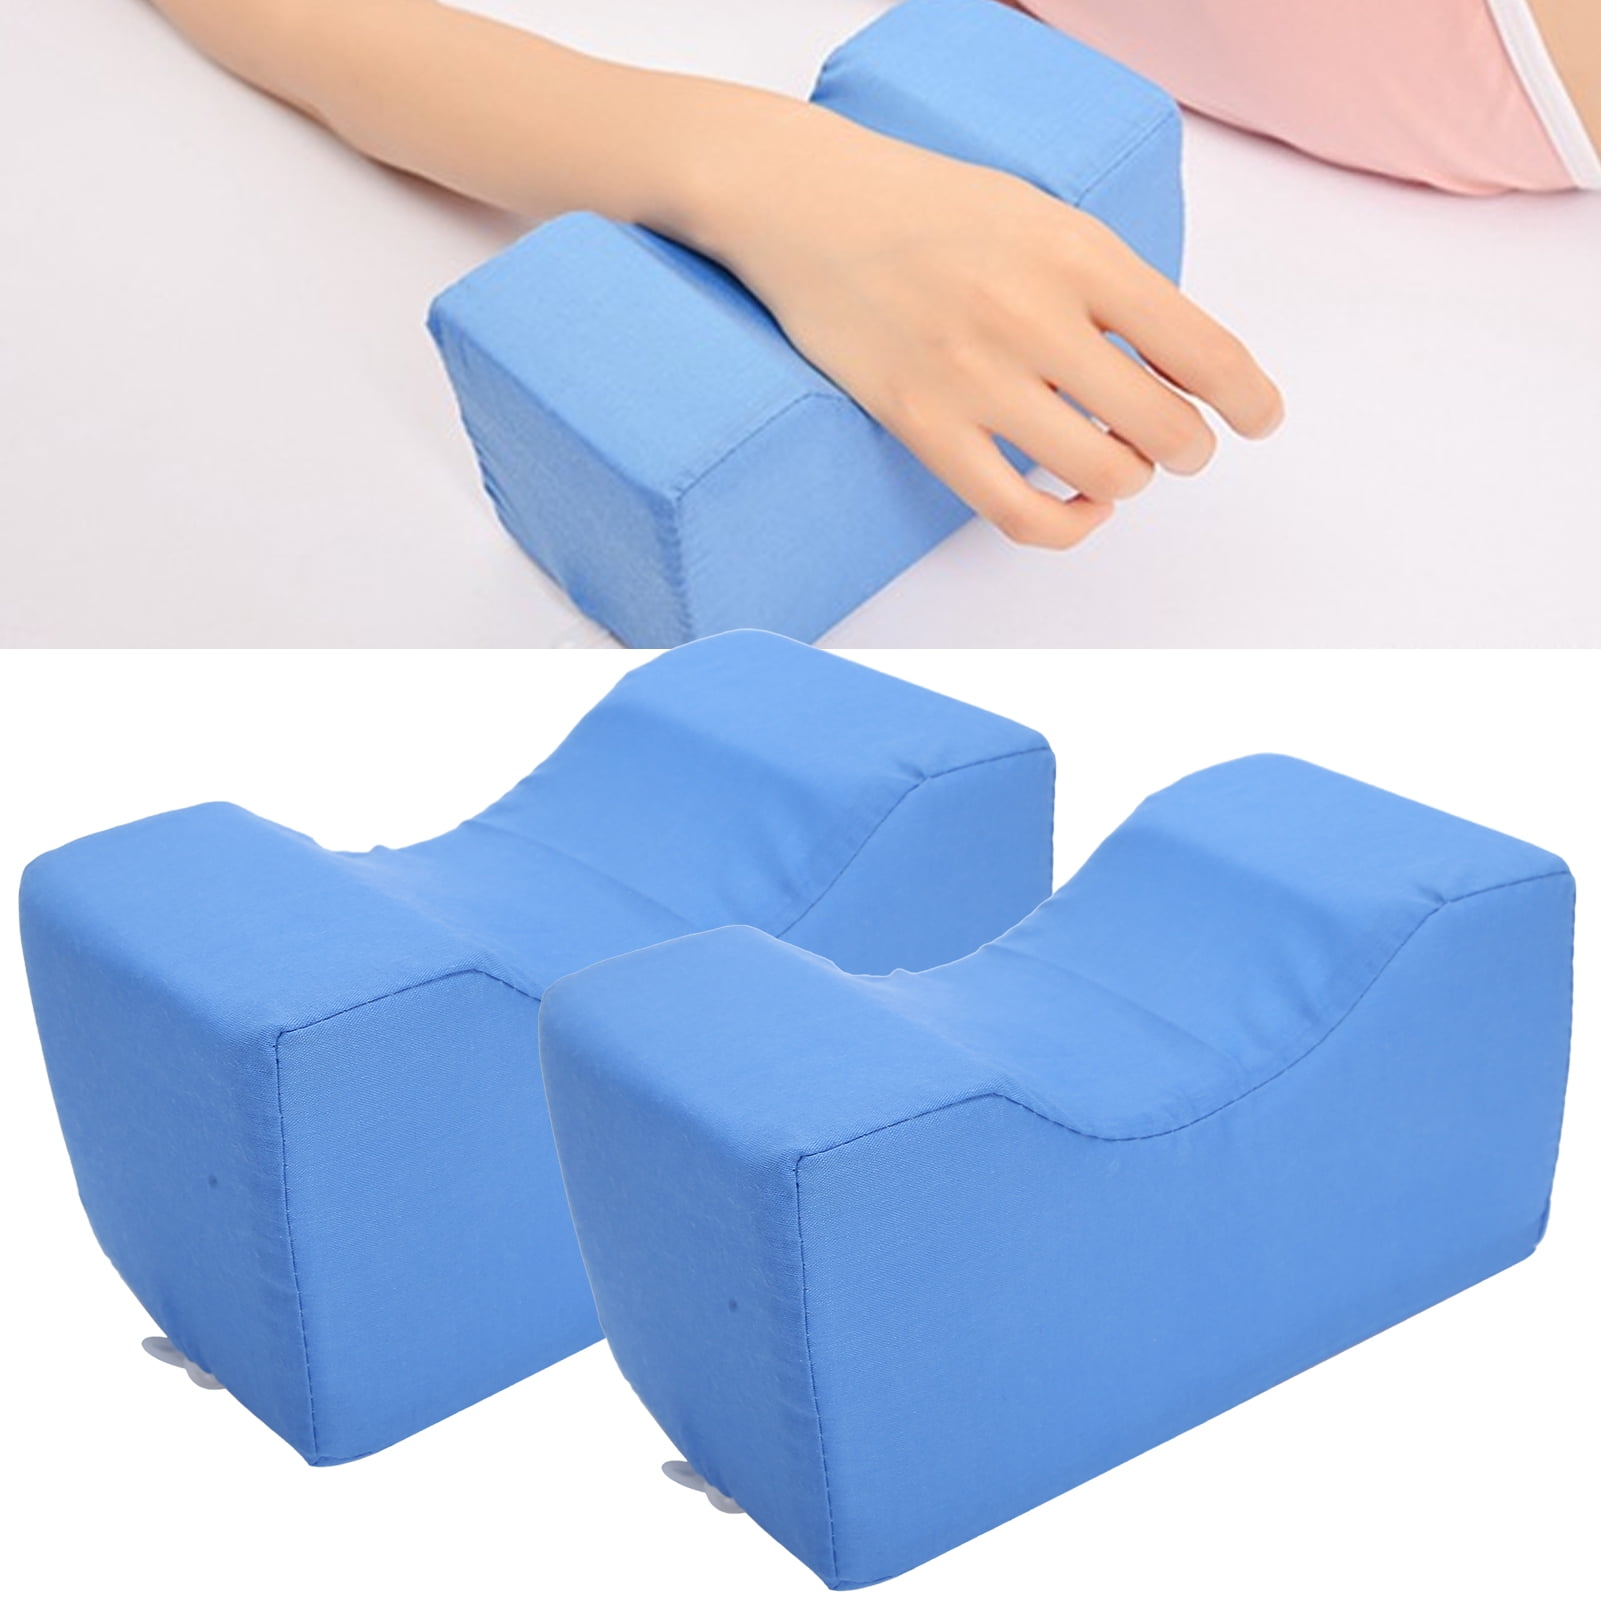 Foot Elevation Pillow Ankle Heel Elevator Wedge Foot Support Pillow Medical  Ankle Cushion for Bed Sore Foot Pressure Ulcer Sleeping Feet Leg Rest  Elevated Suppo…